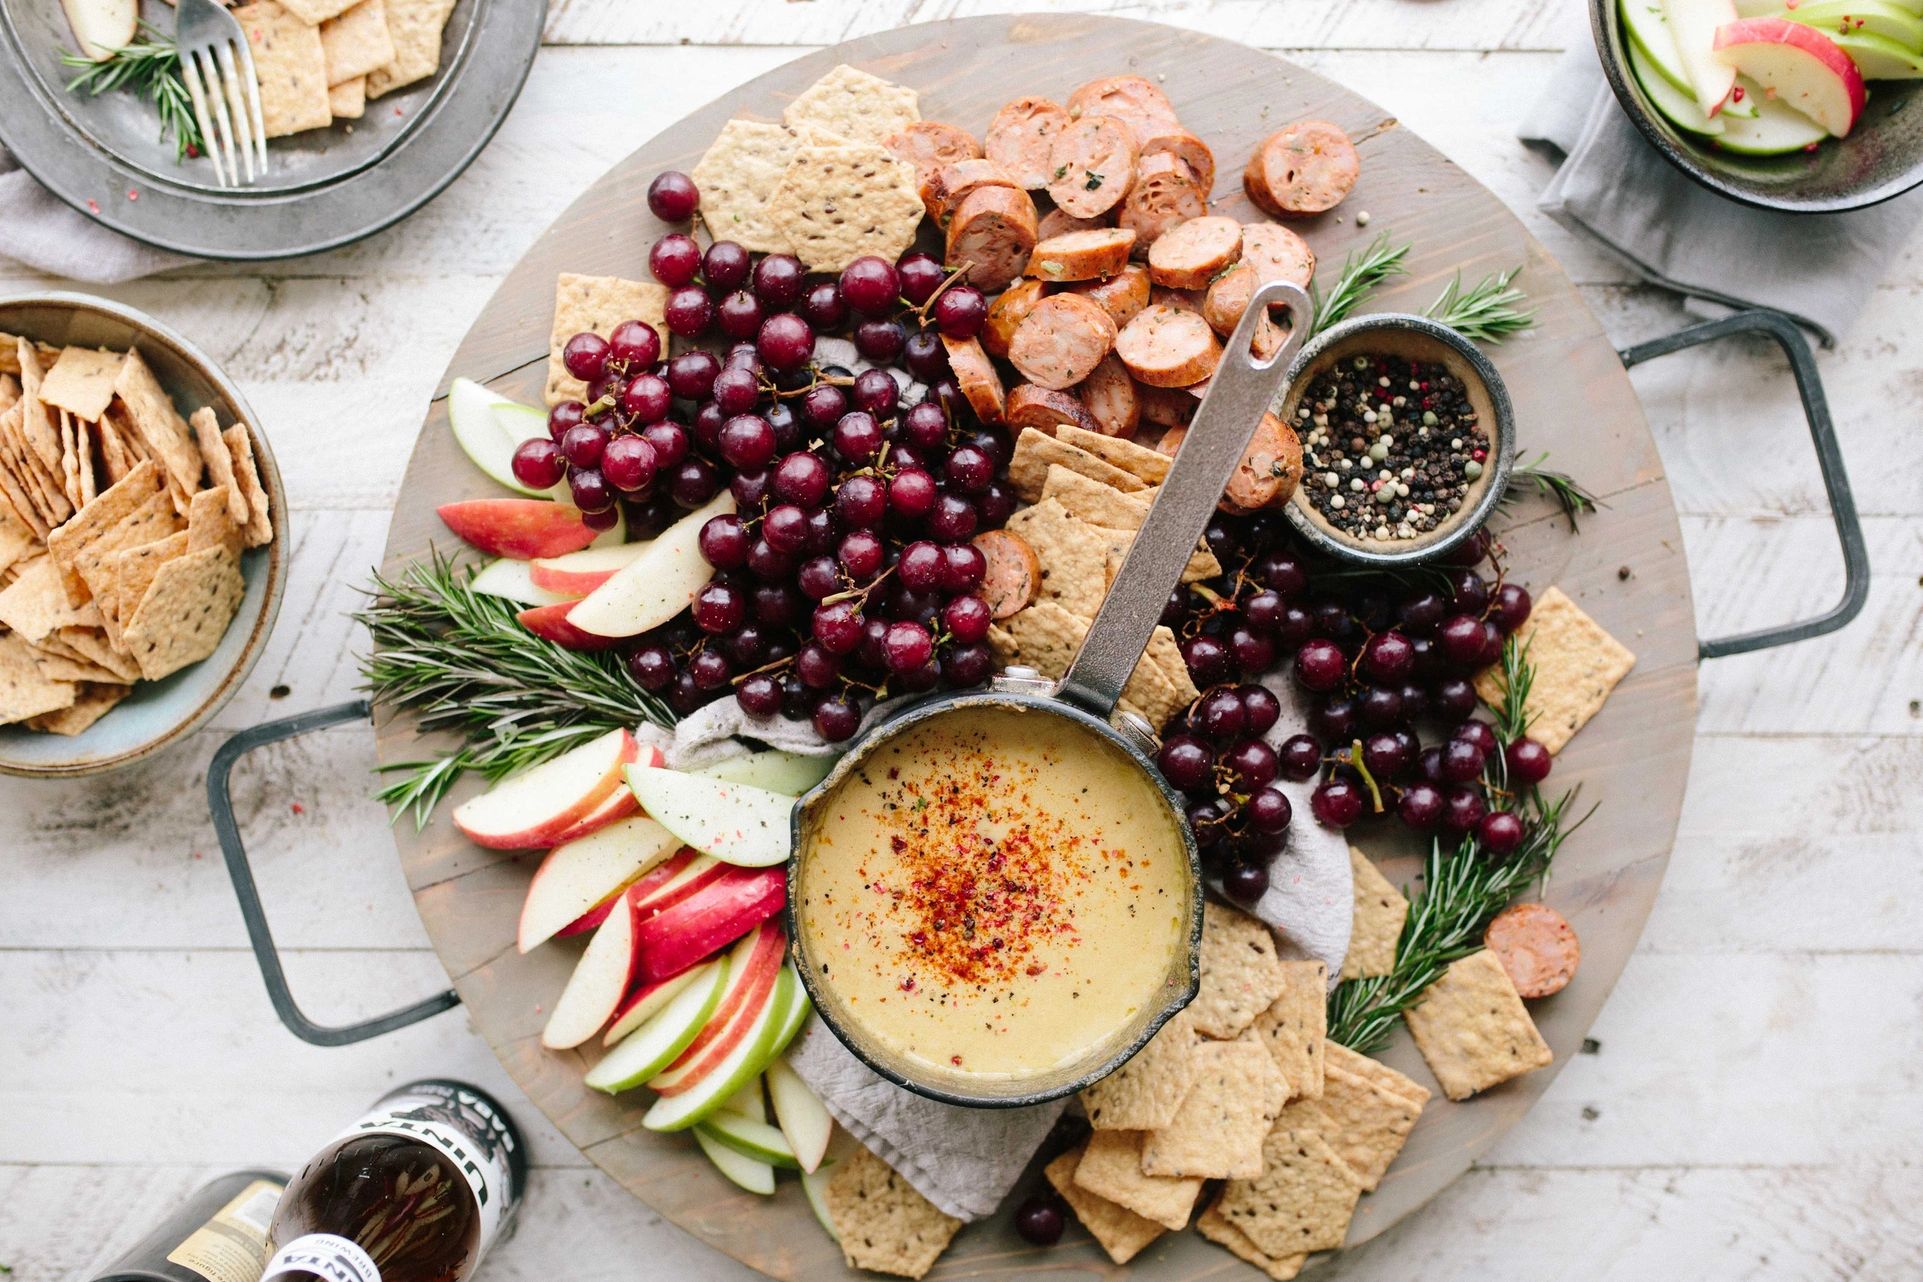 A charcuterie board on a table surrounded by small bowls of crackers and fruit